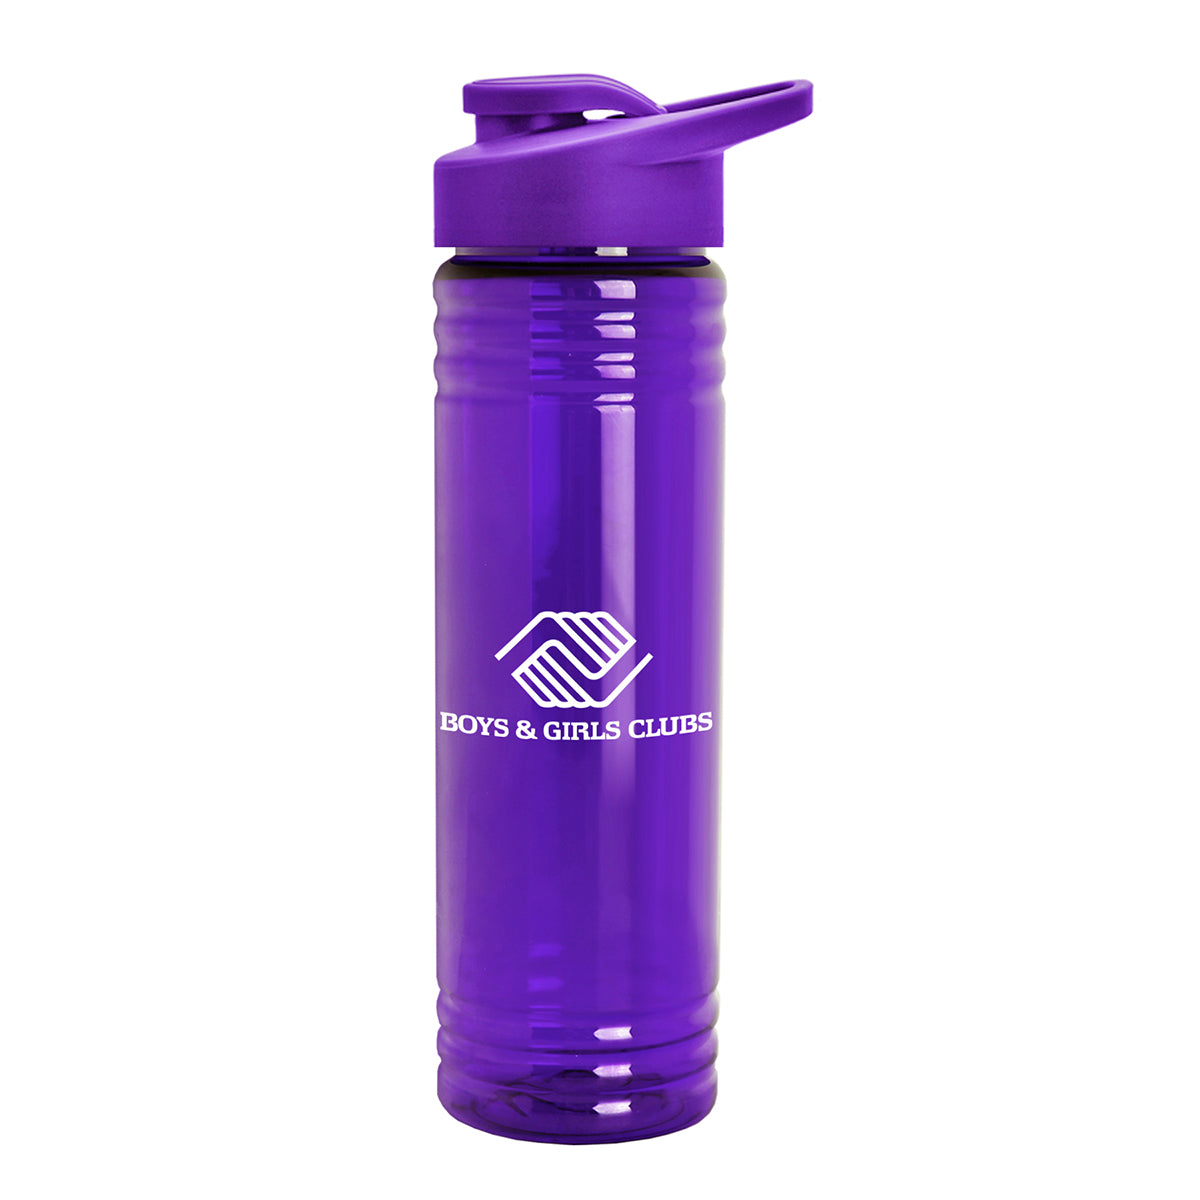 24 oz. Slim Fit Water Sports Bottle - Boys & Girls Clubs of America Store